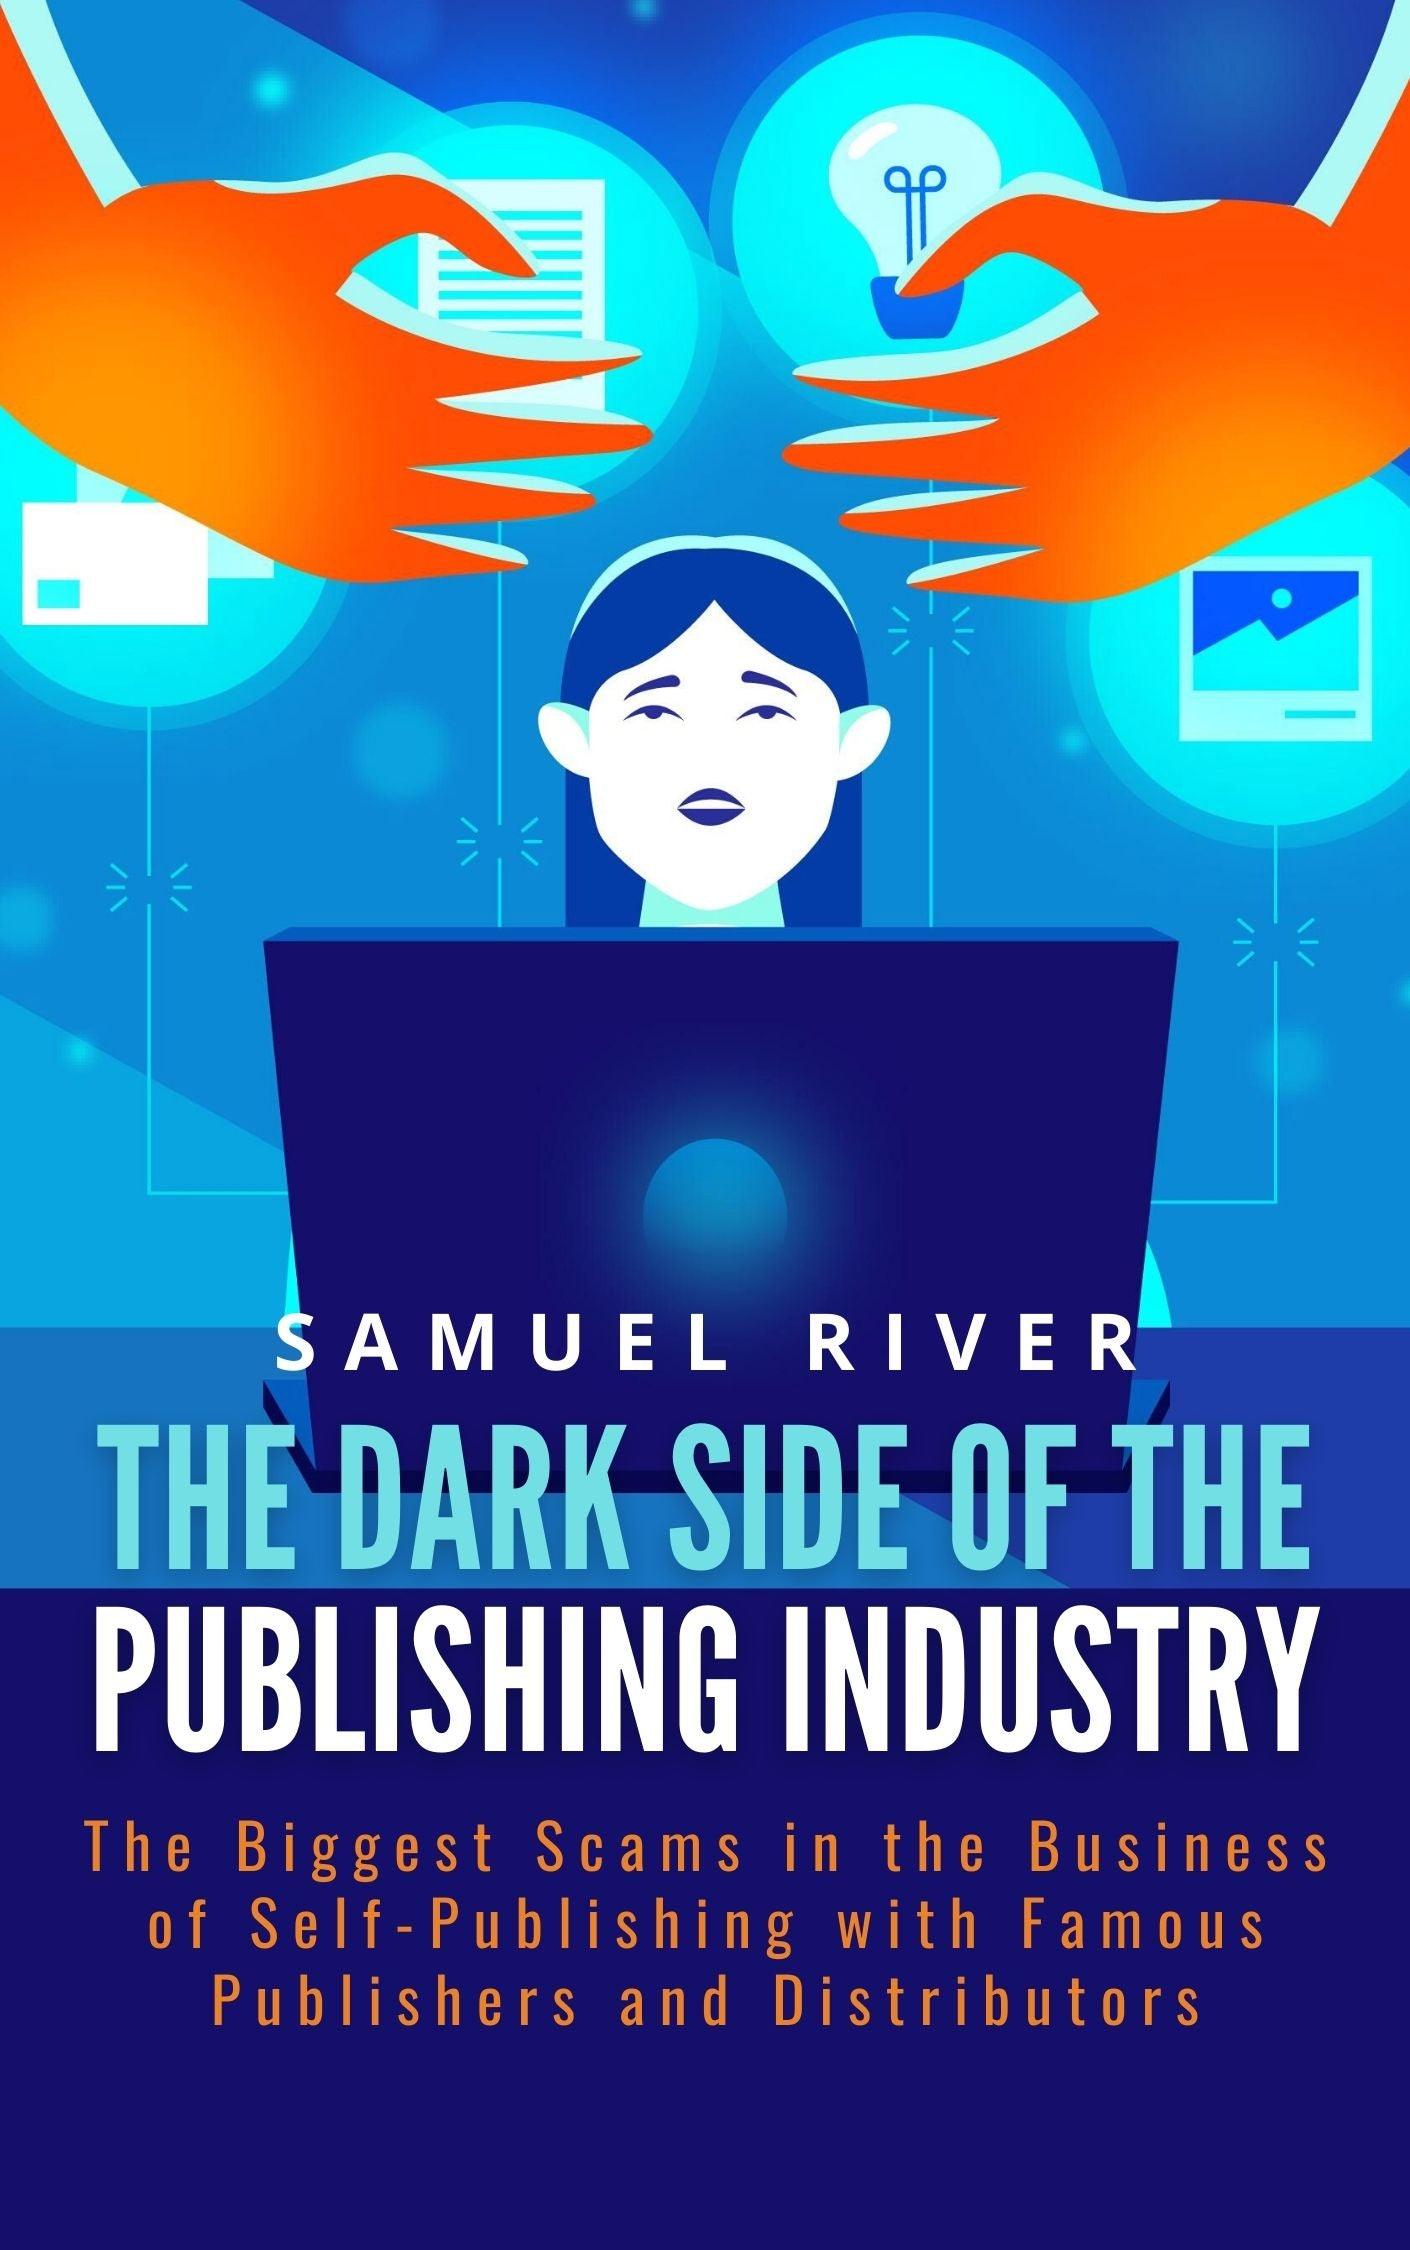 The Dark Side of the Publishing Industry - 22 Lions